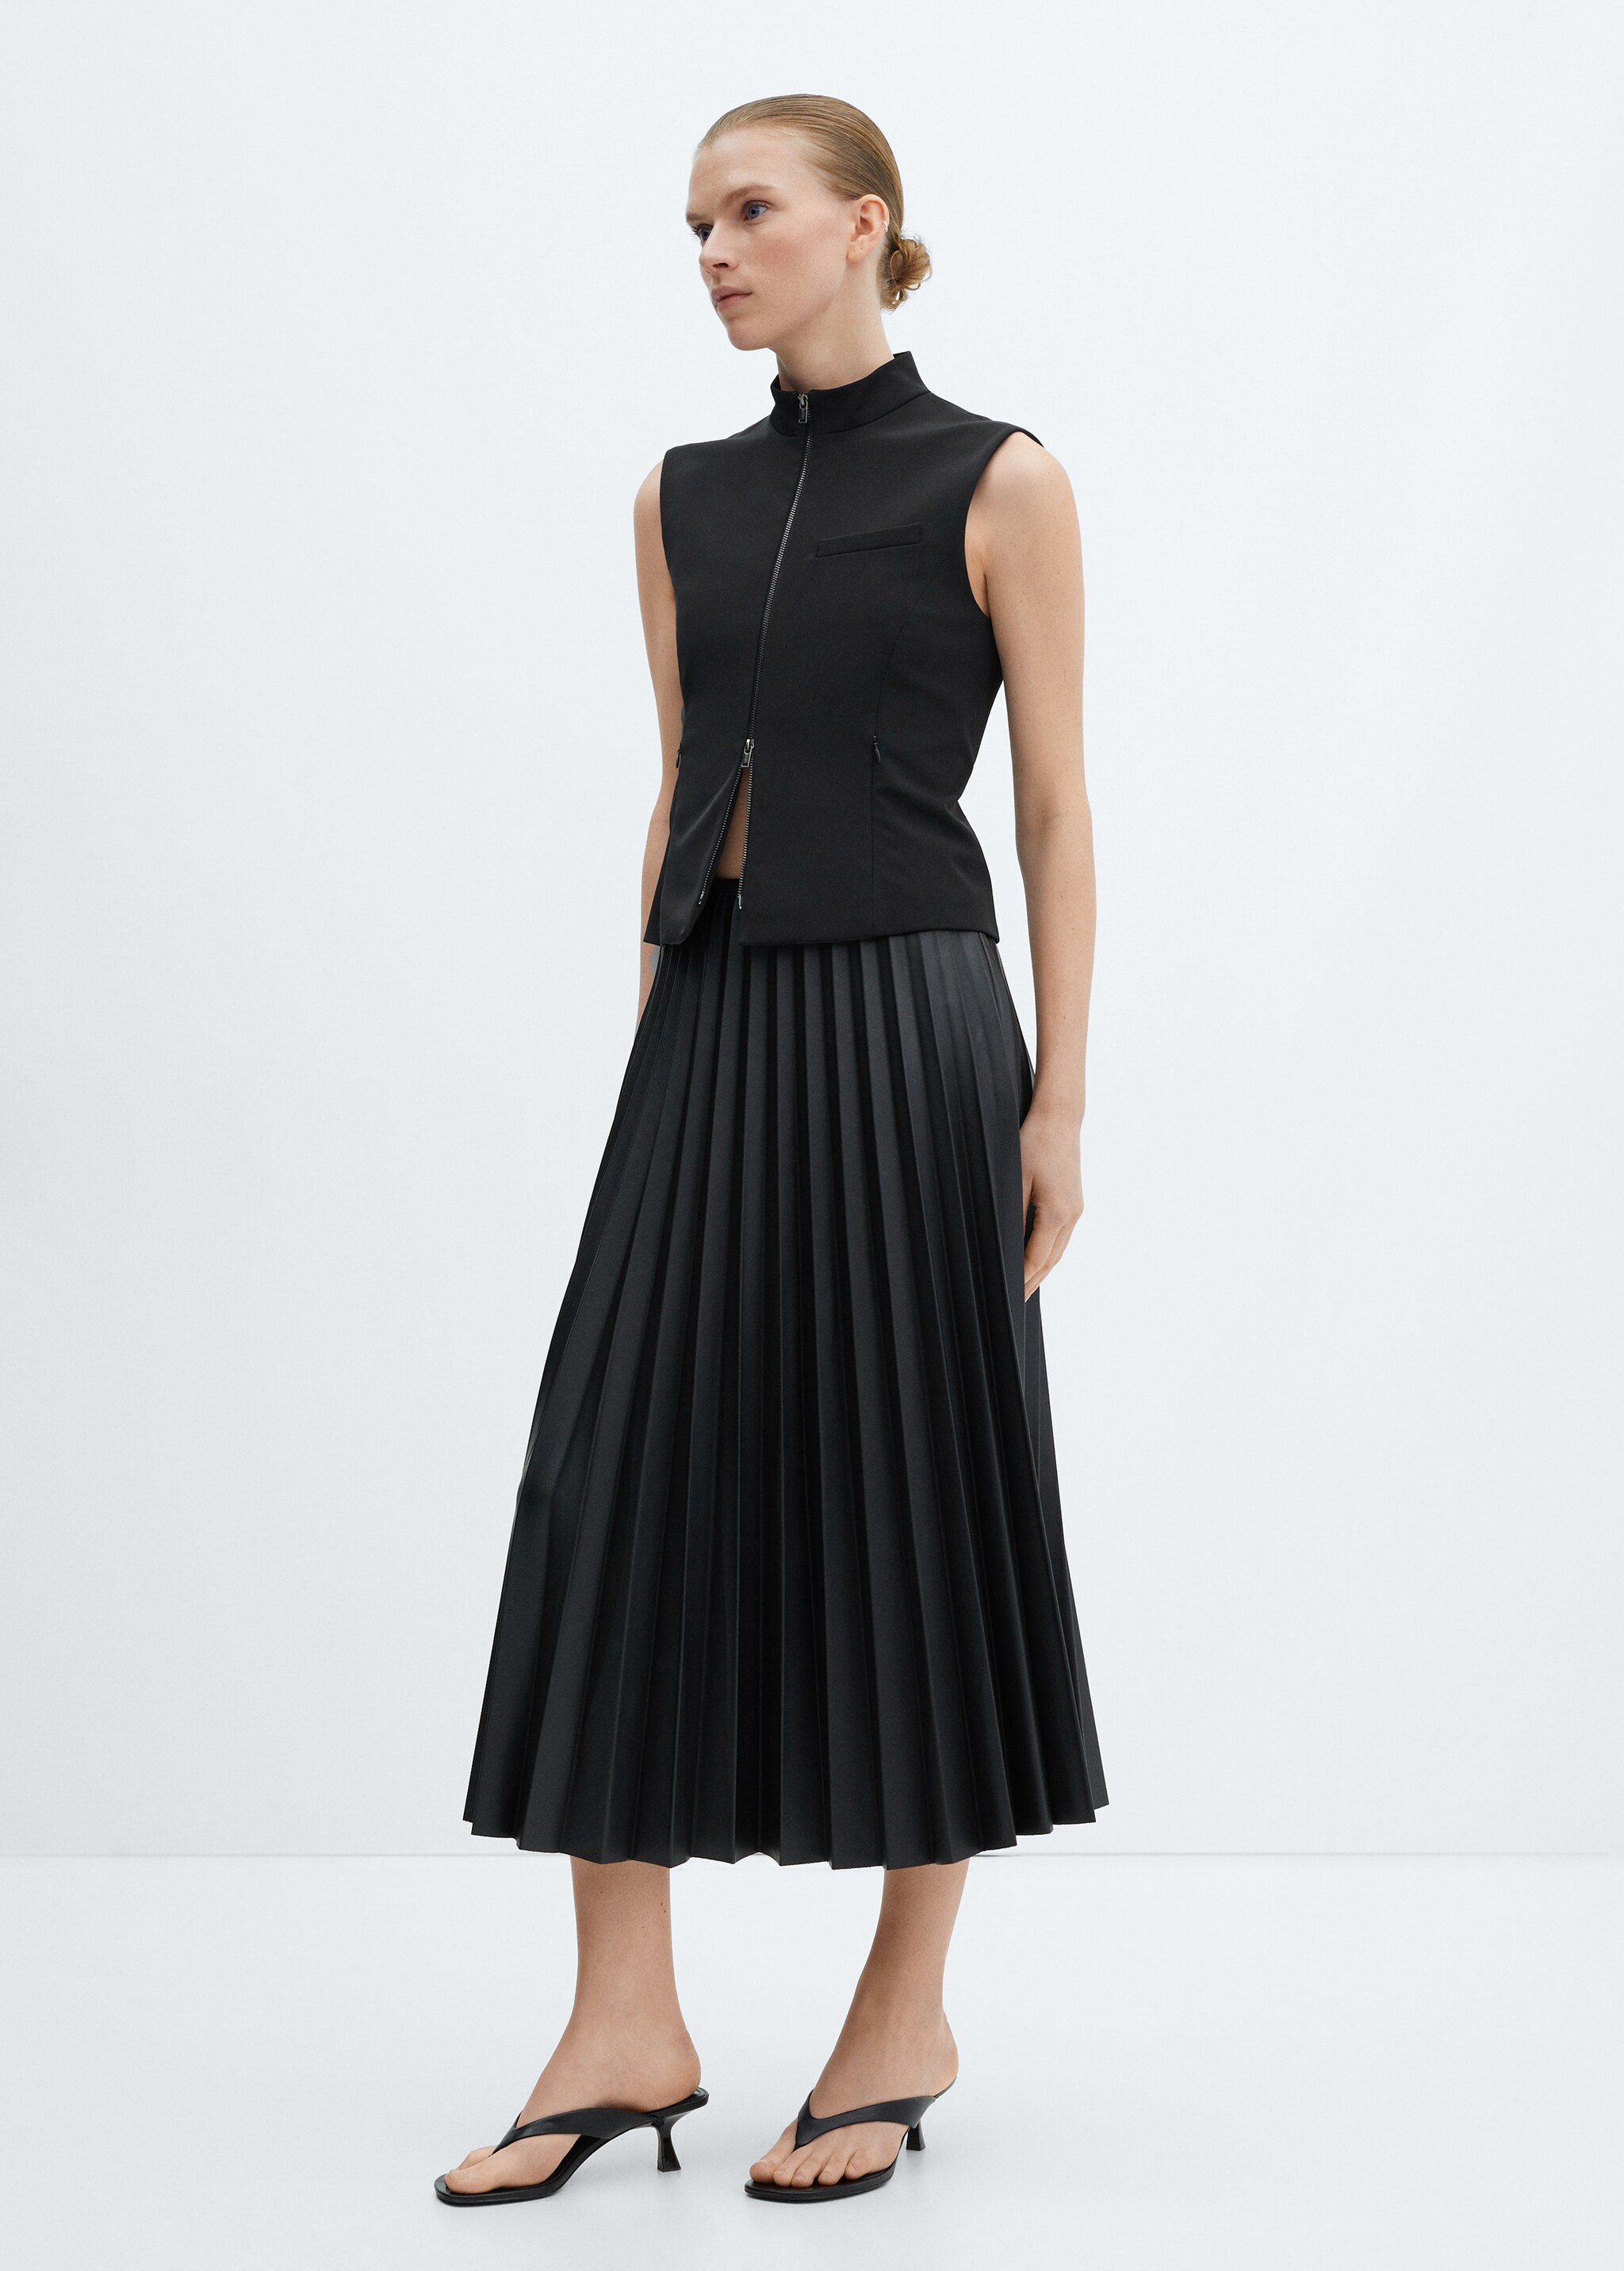 Leather-effect pleated skirt - General plane